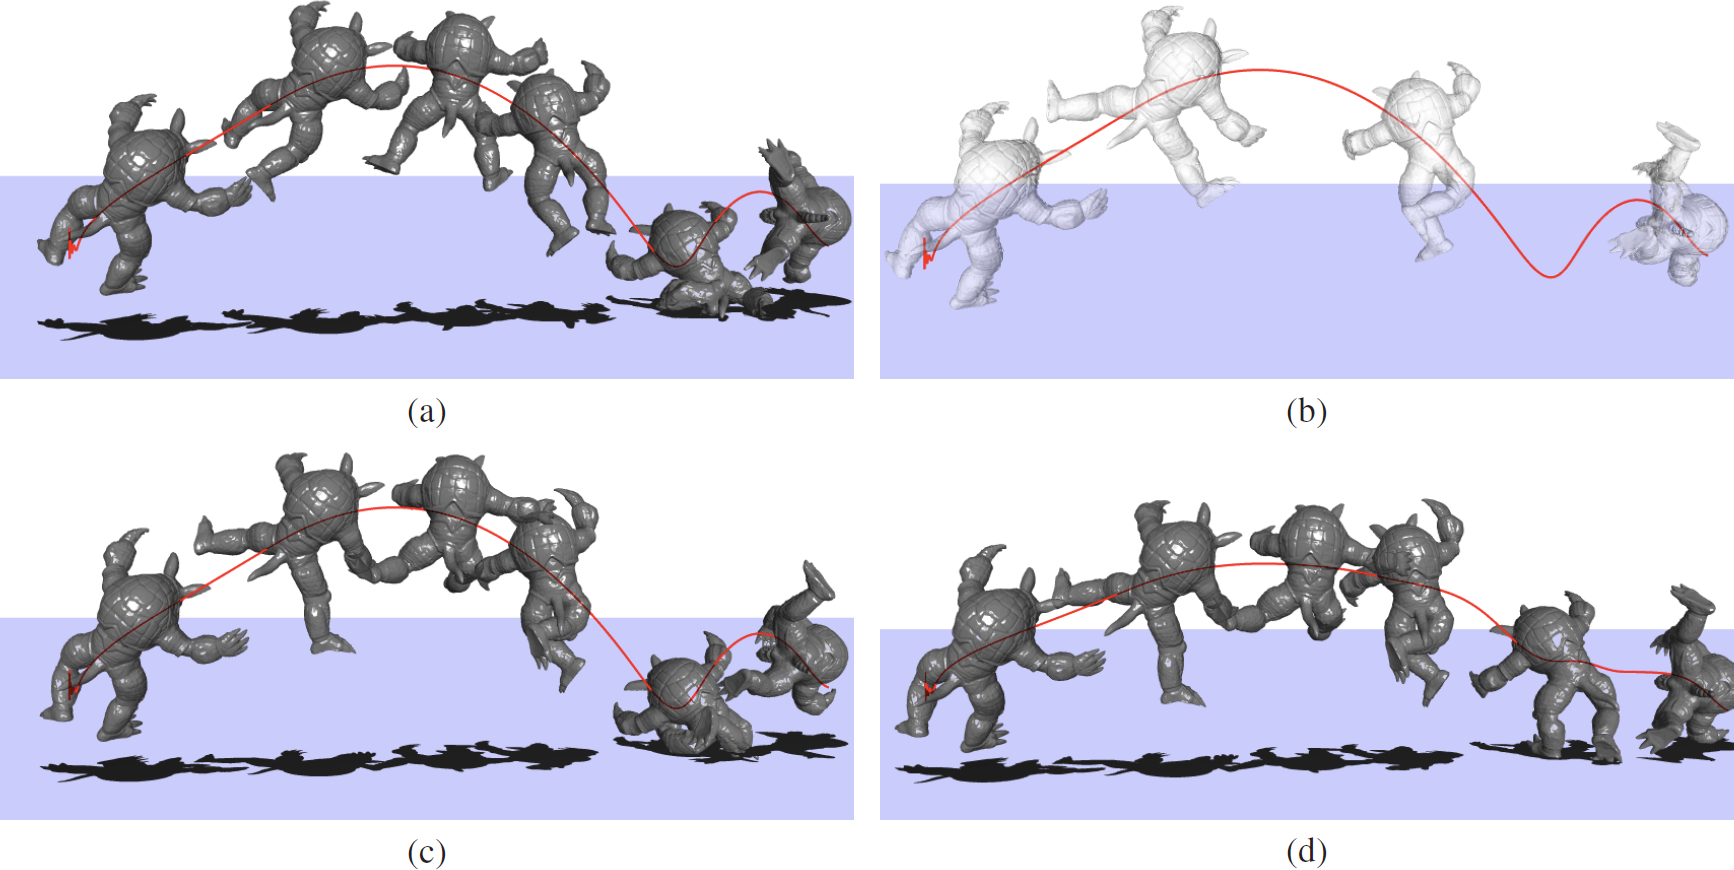 Deformation control results. (a) the original elastic body animation. (b) keyframe shapes modified by the user. (c) the deformation control result. (d) the trajectory control result.